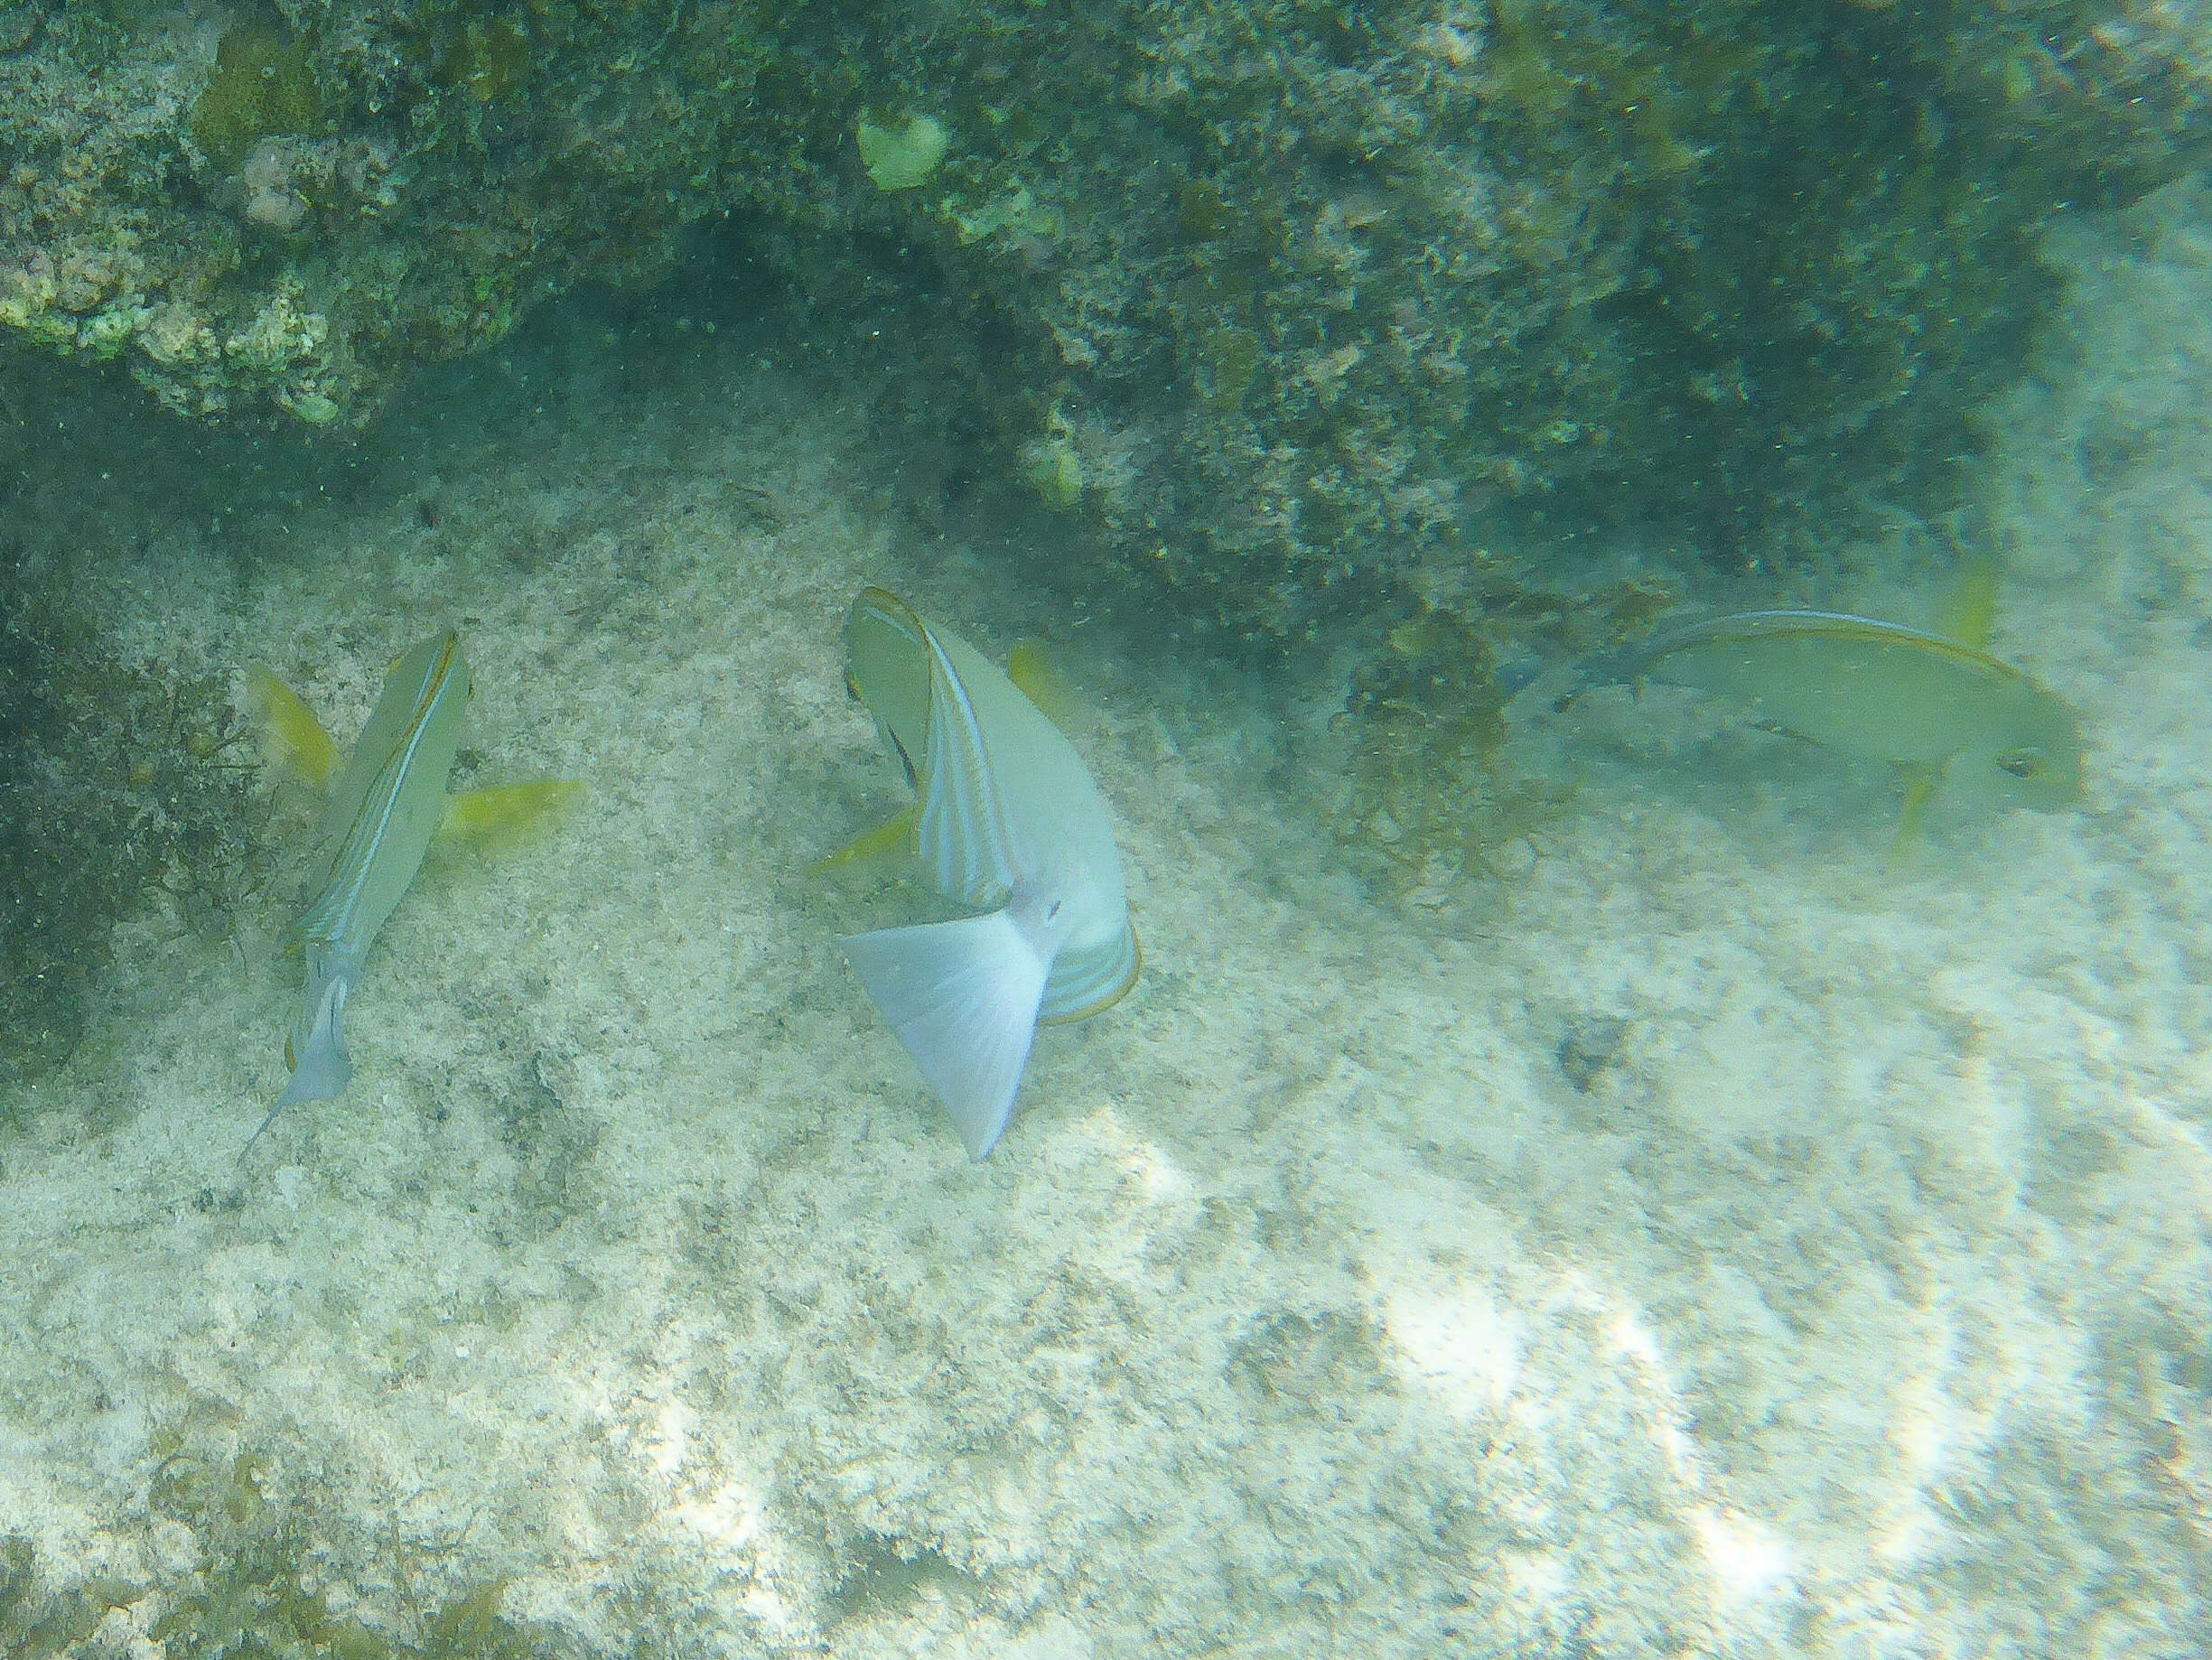 Image of Cuvier's Surgeonfish